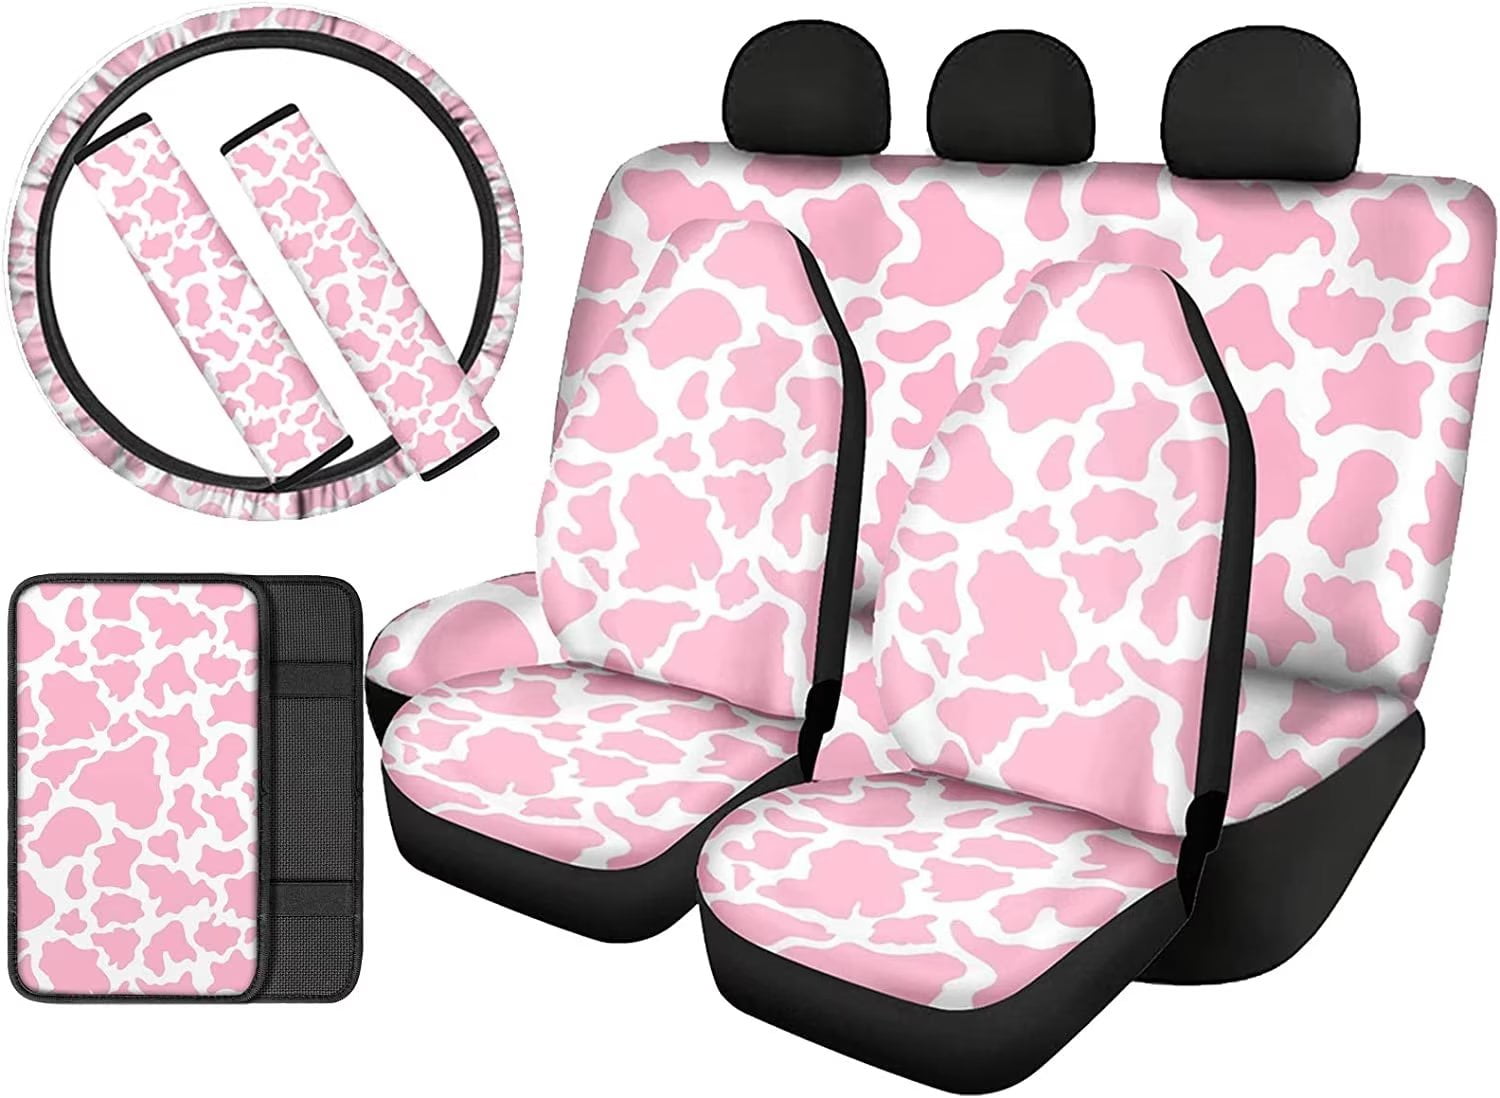 Pzuqiu Pink Floral Butterfly Car Accessories Rear Bench Seat